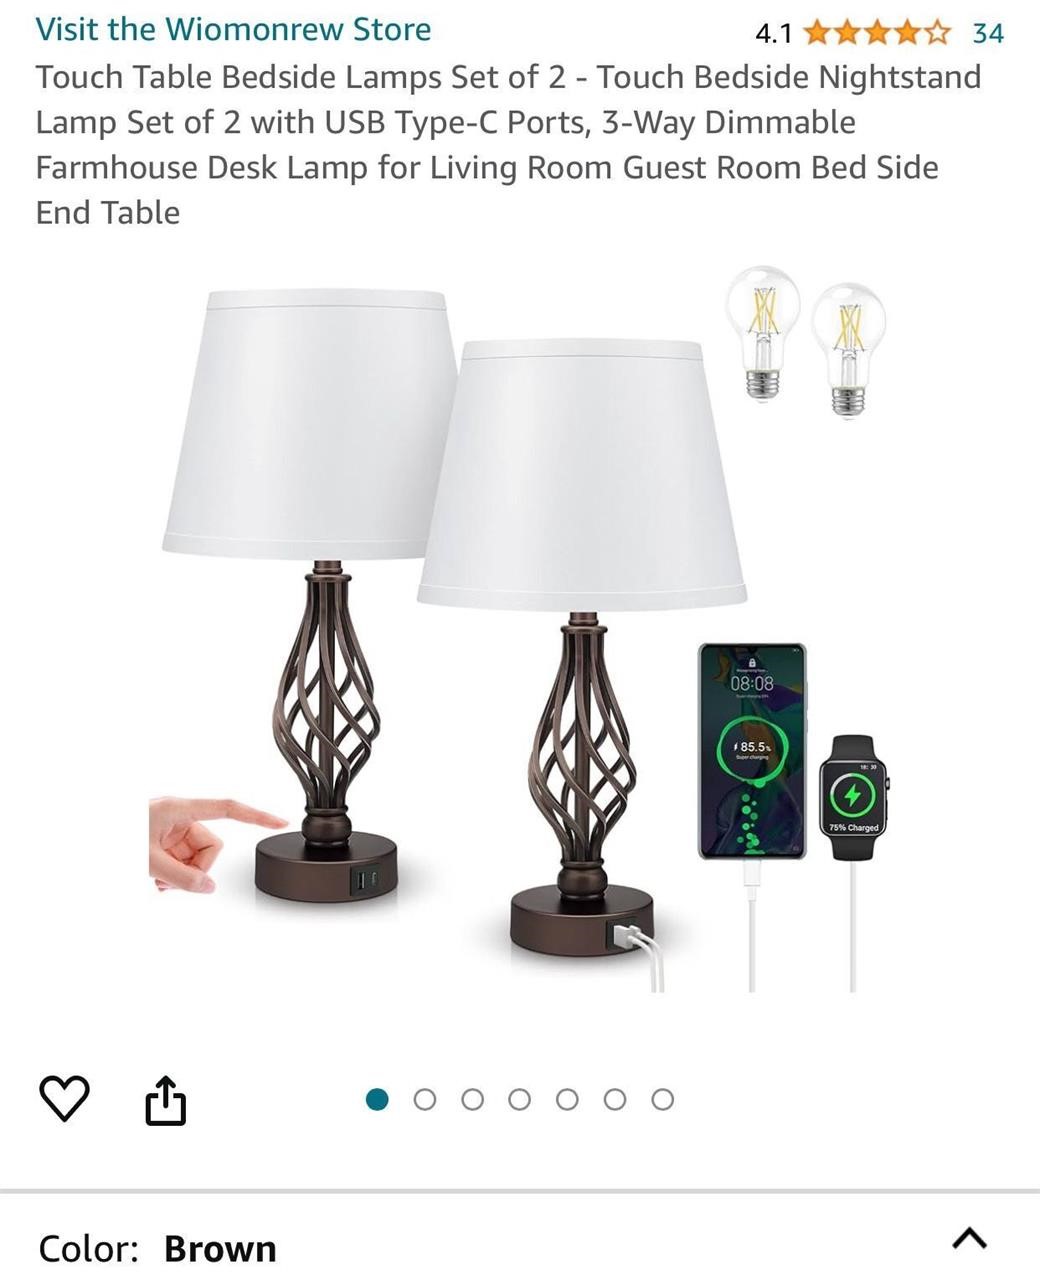 Touch Table Bedside Lamps Set of 2